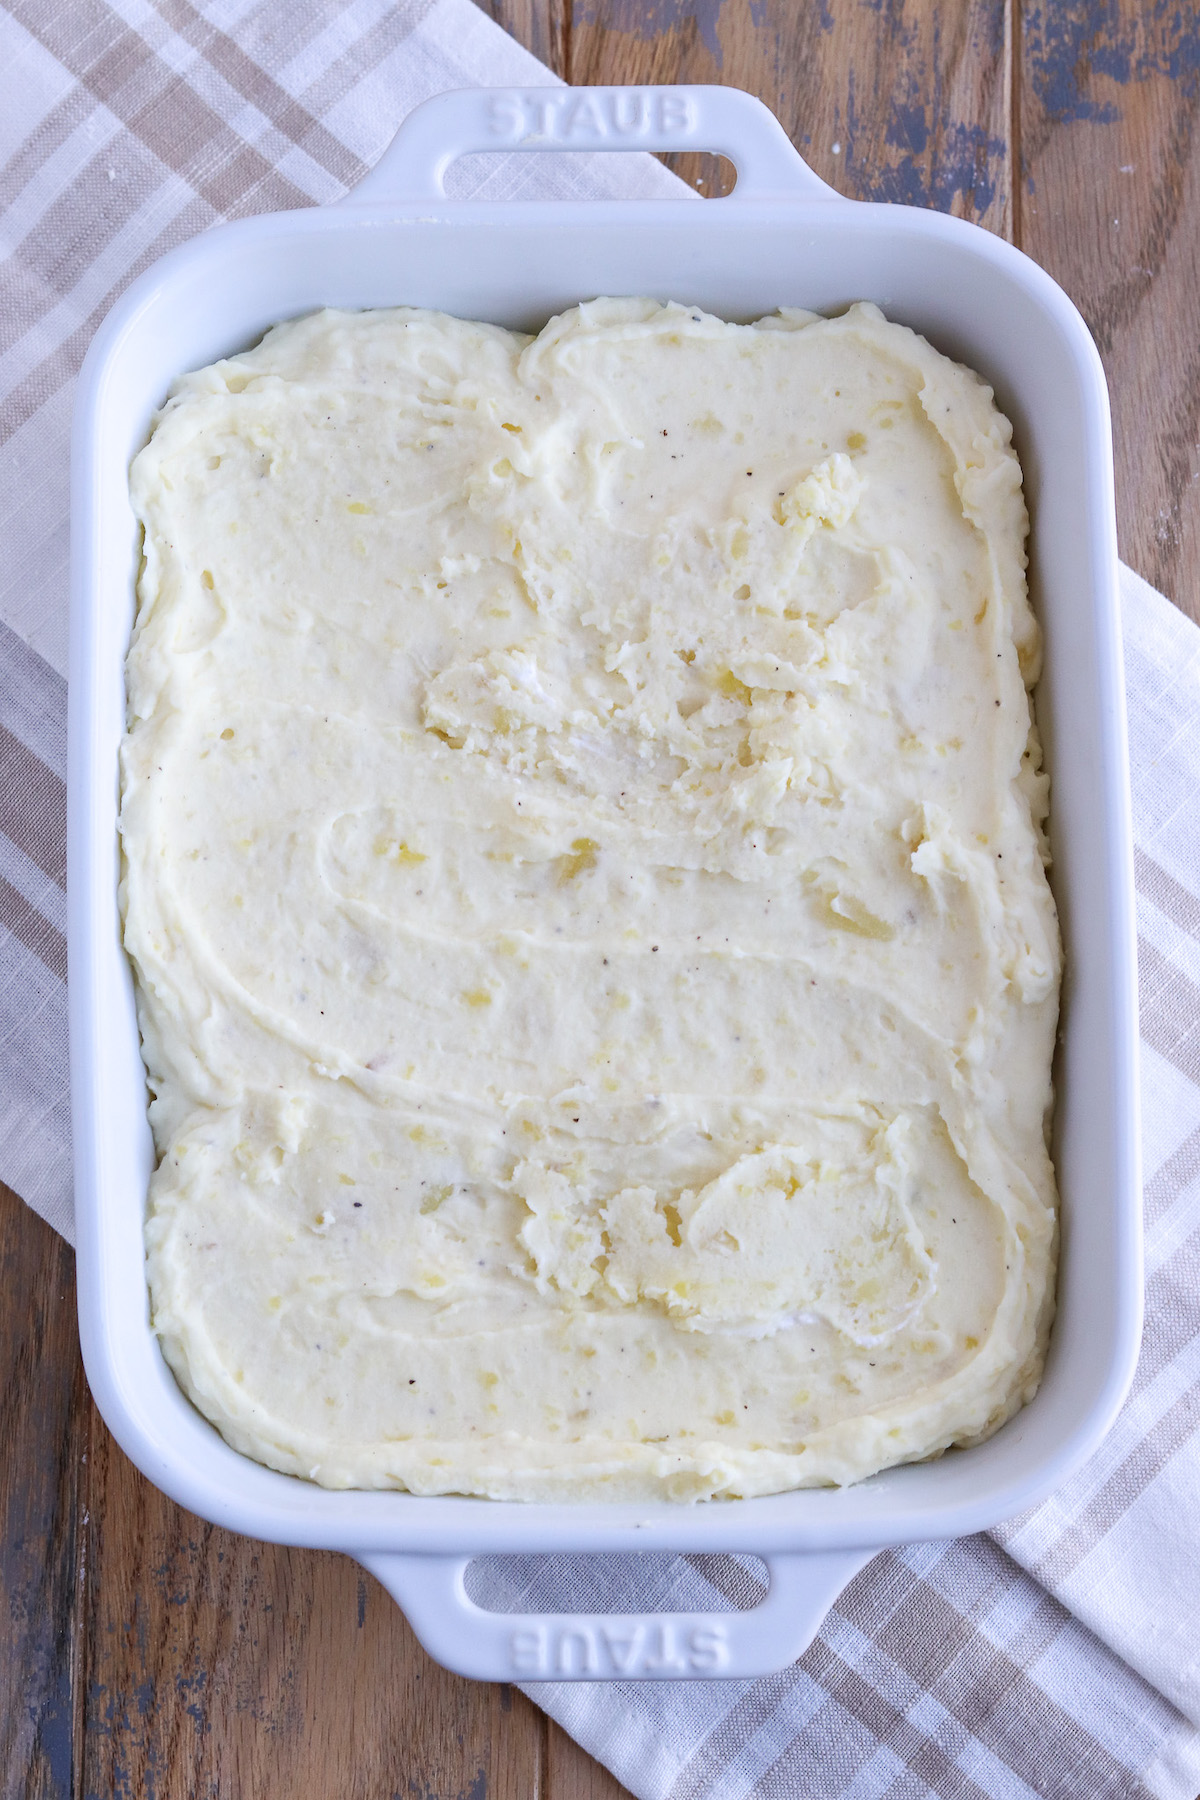 mashed potatoes in a baking dish